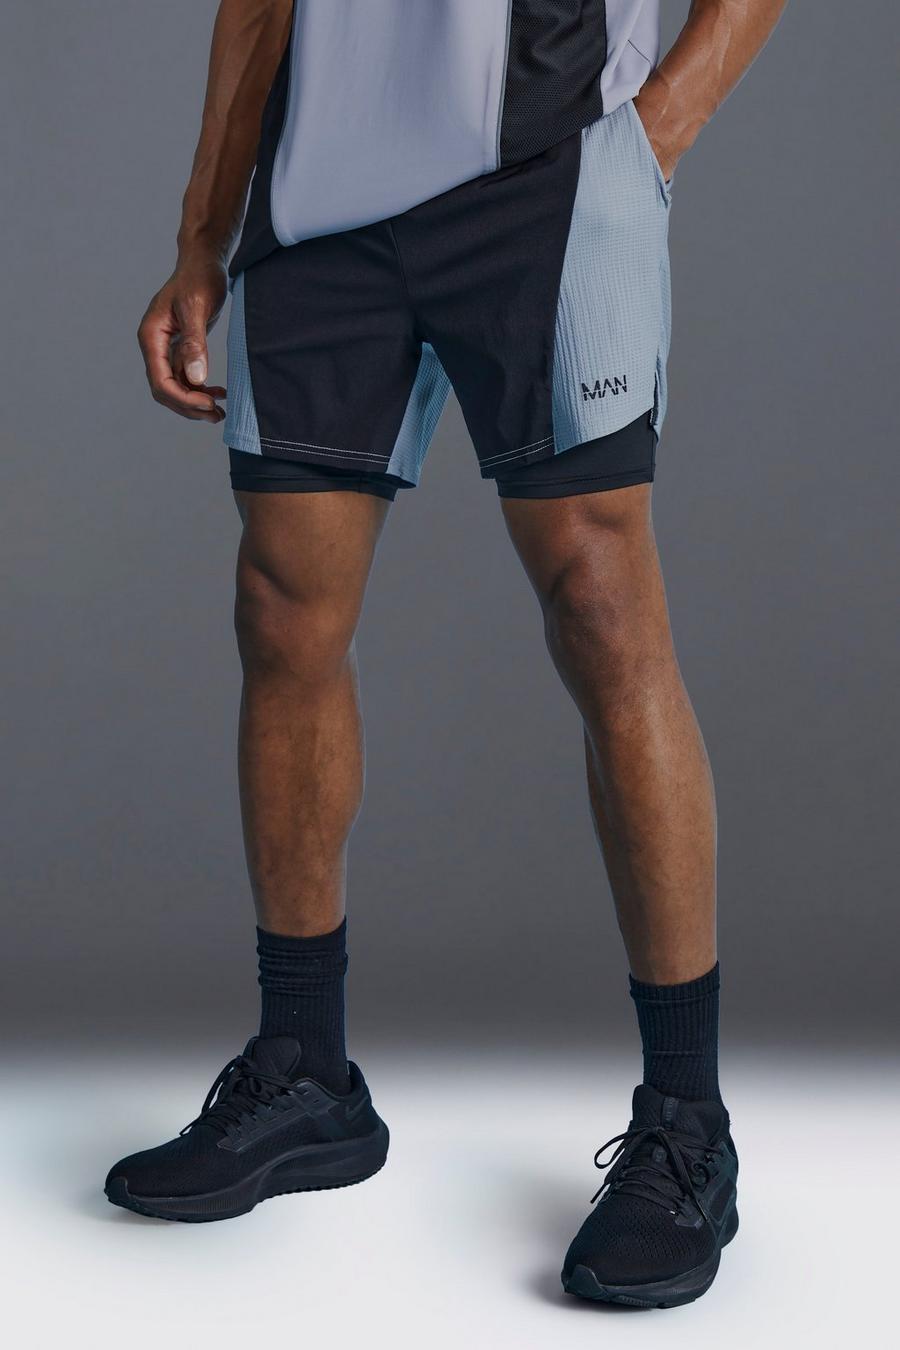 Man Active Colorblock 2-in-1 Shorts, Charcoal